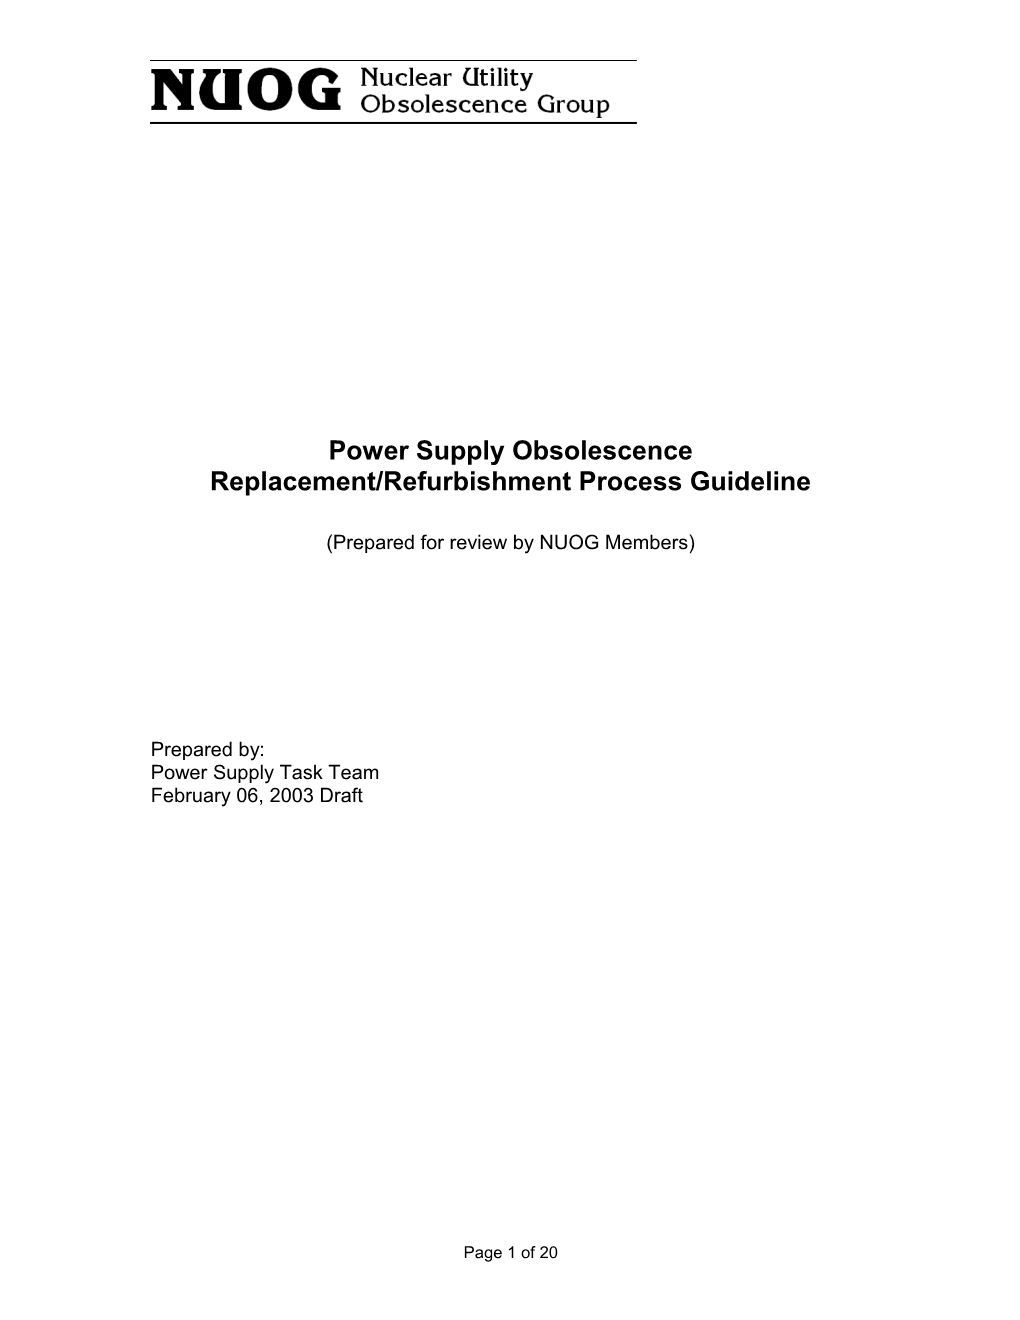 Power Supply Obsolescence Replacement/Refurbishment Process Guideline